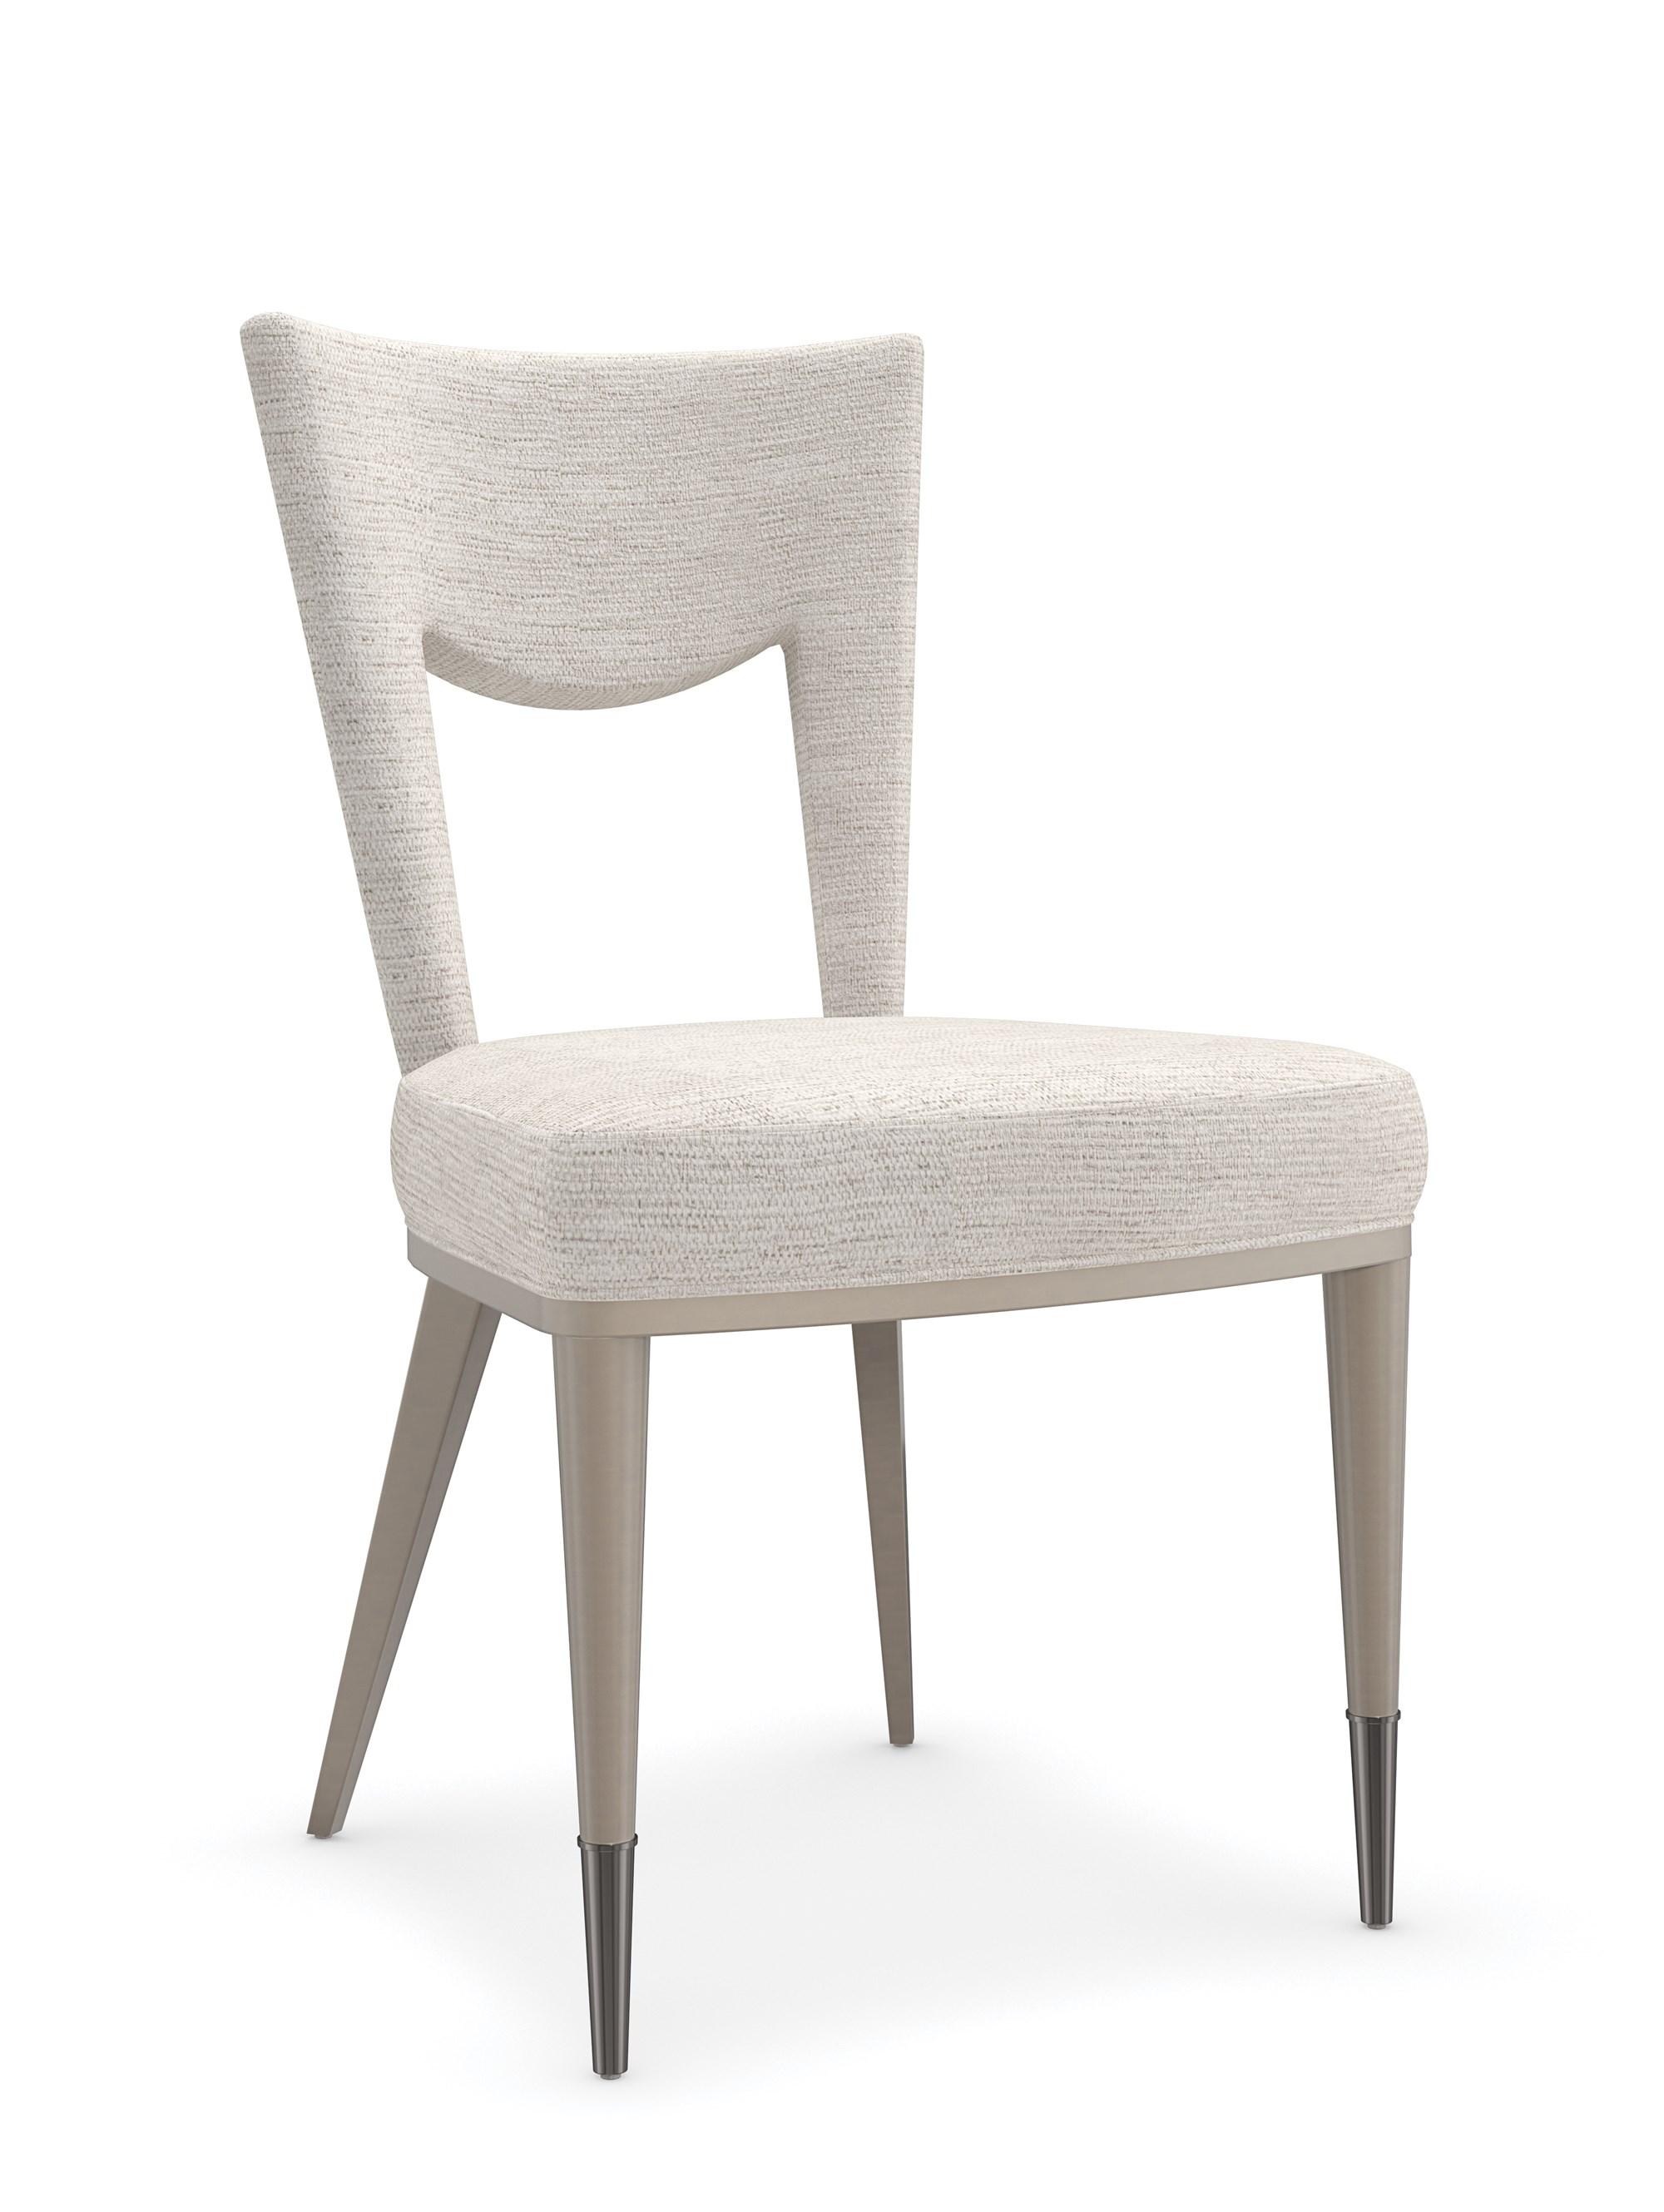 Contemporary Dining Chair Set STRATA CLA-422-284-Set-2 in Silver, Ivory 